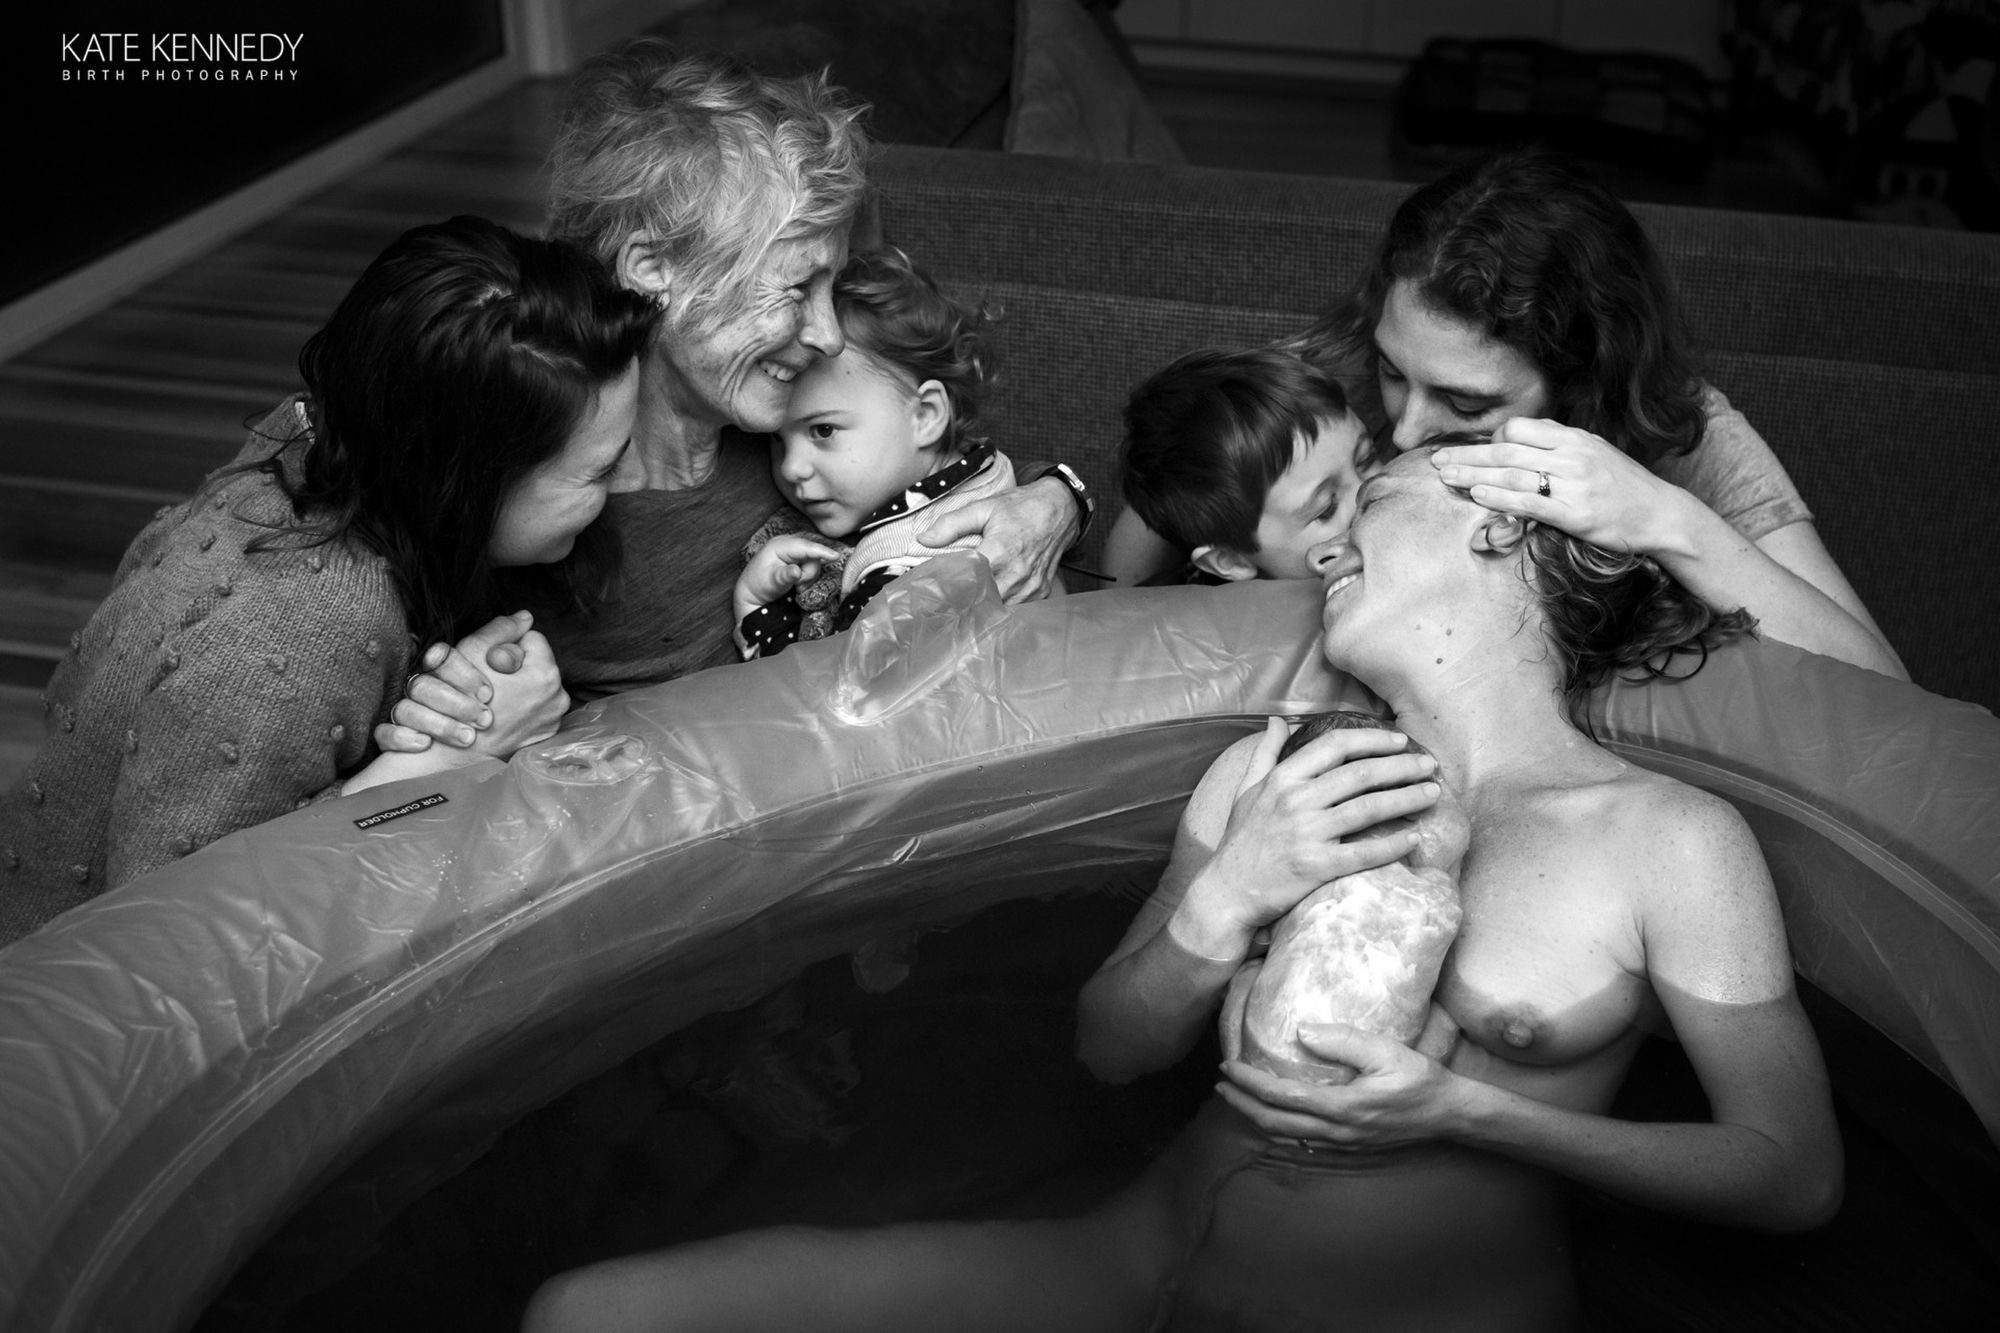 A water birth where grandma holds a toddler and looks on as the mother holds the newborn